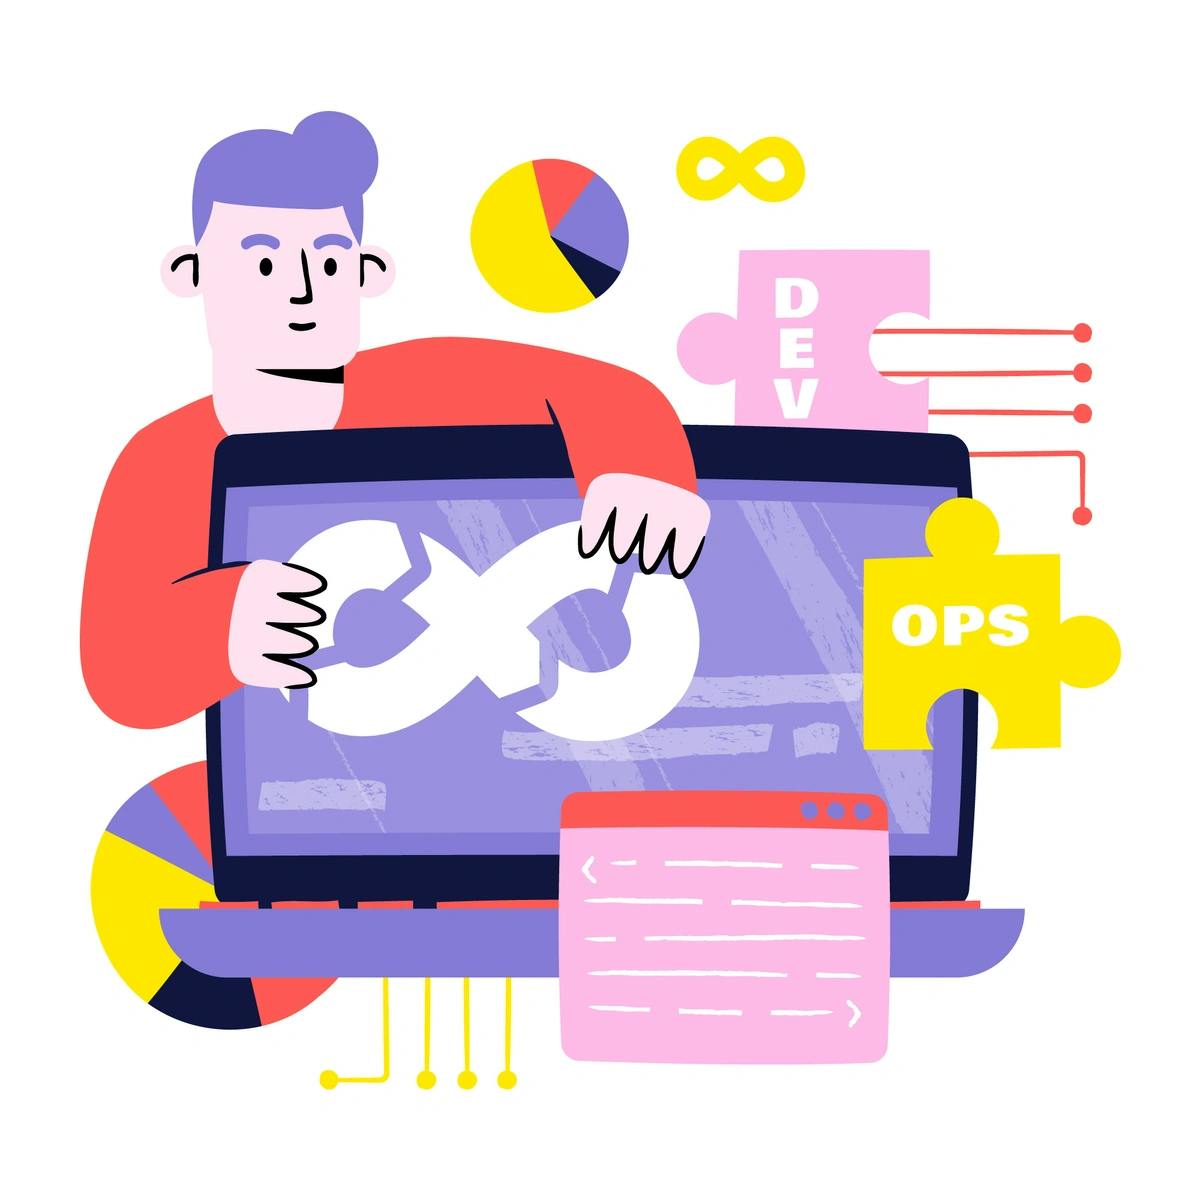 Illustration of a person holding a laptop with symbols representing development (Dev) and operations (Ops) merging, symbolizing the DevOps concept.